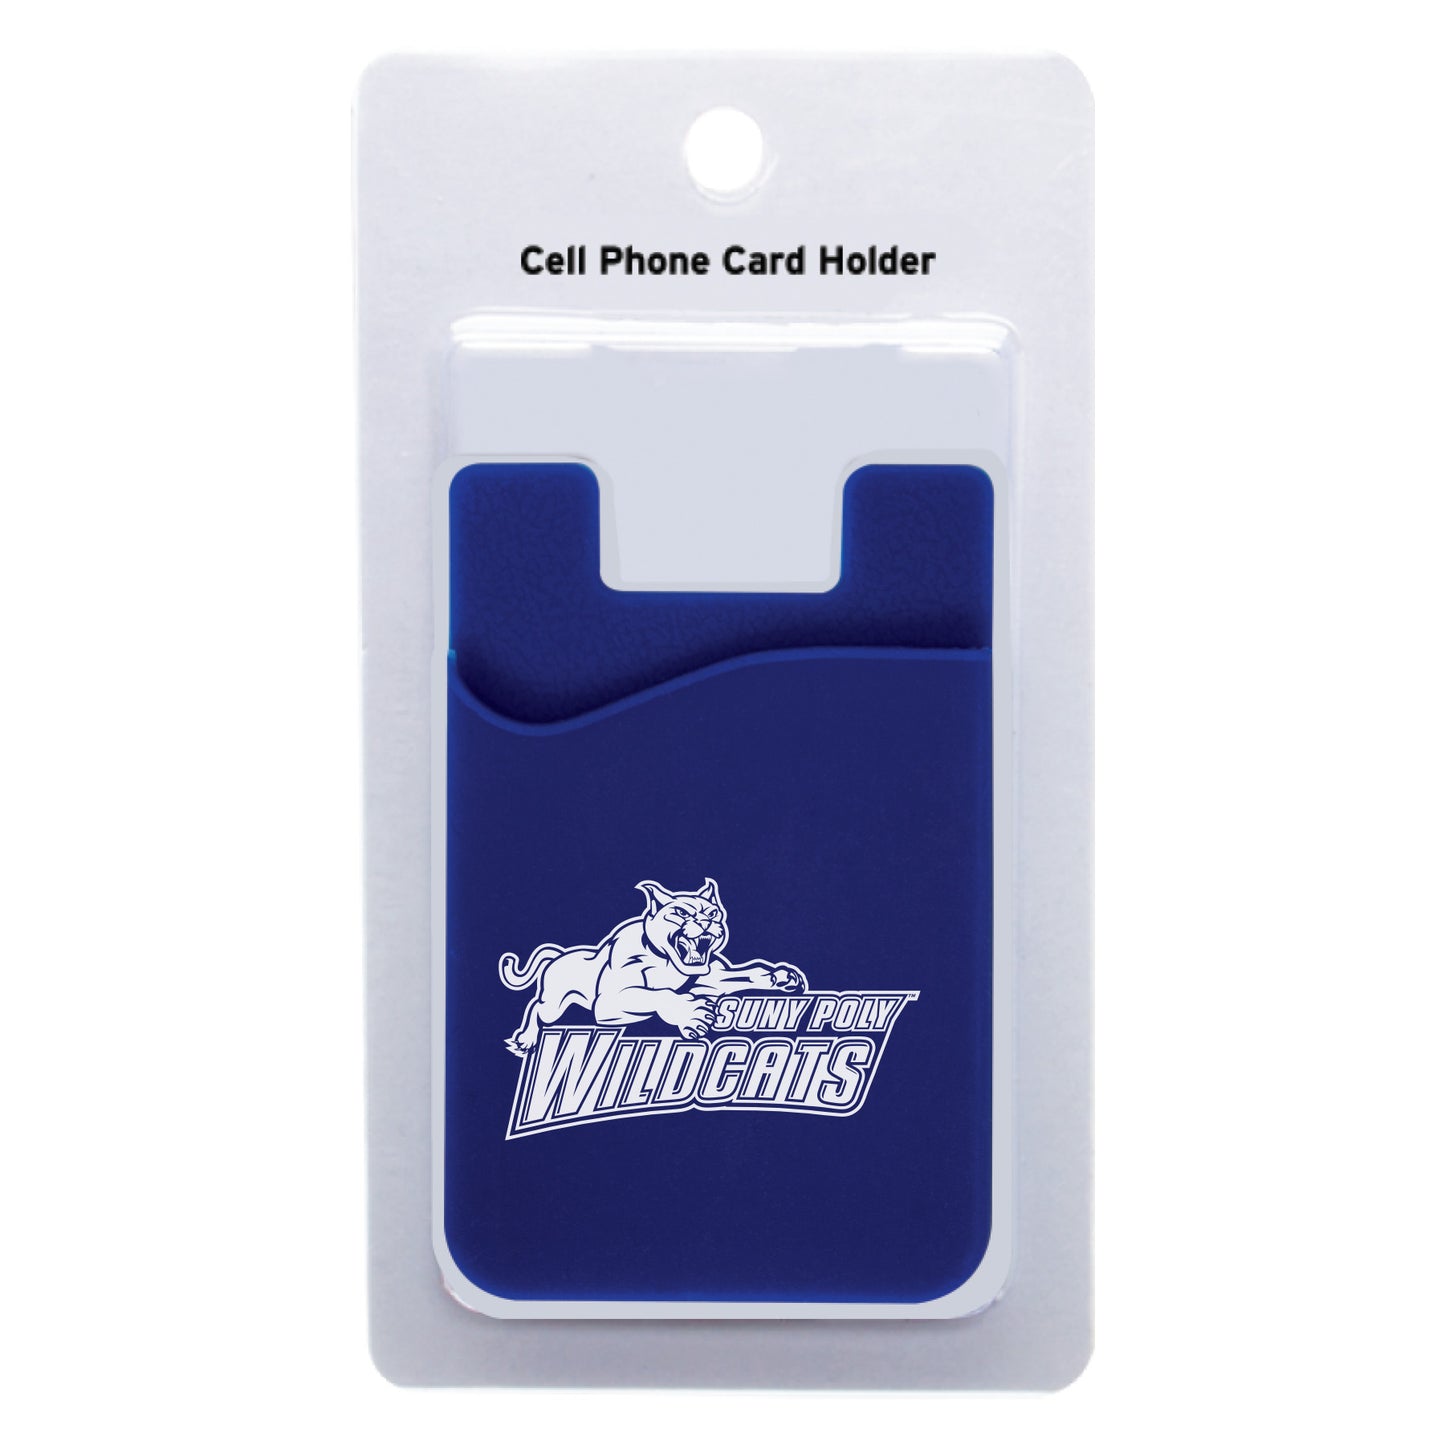 Wildcat Cell Phone Card Holder